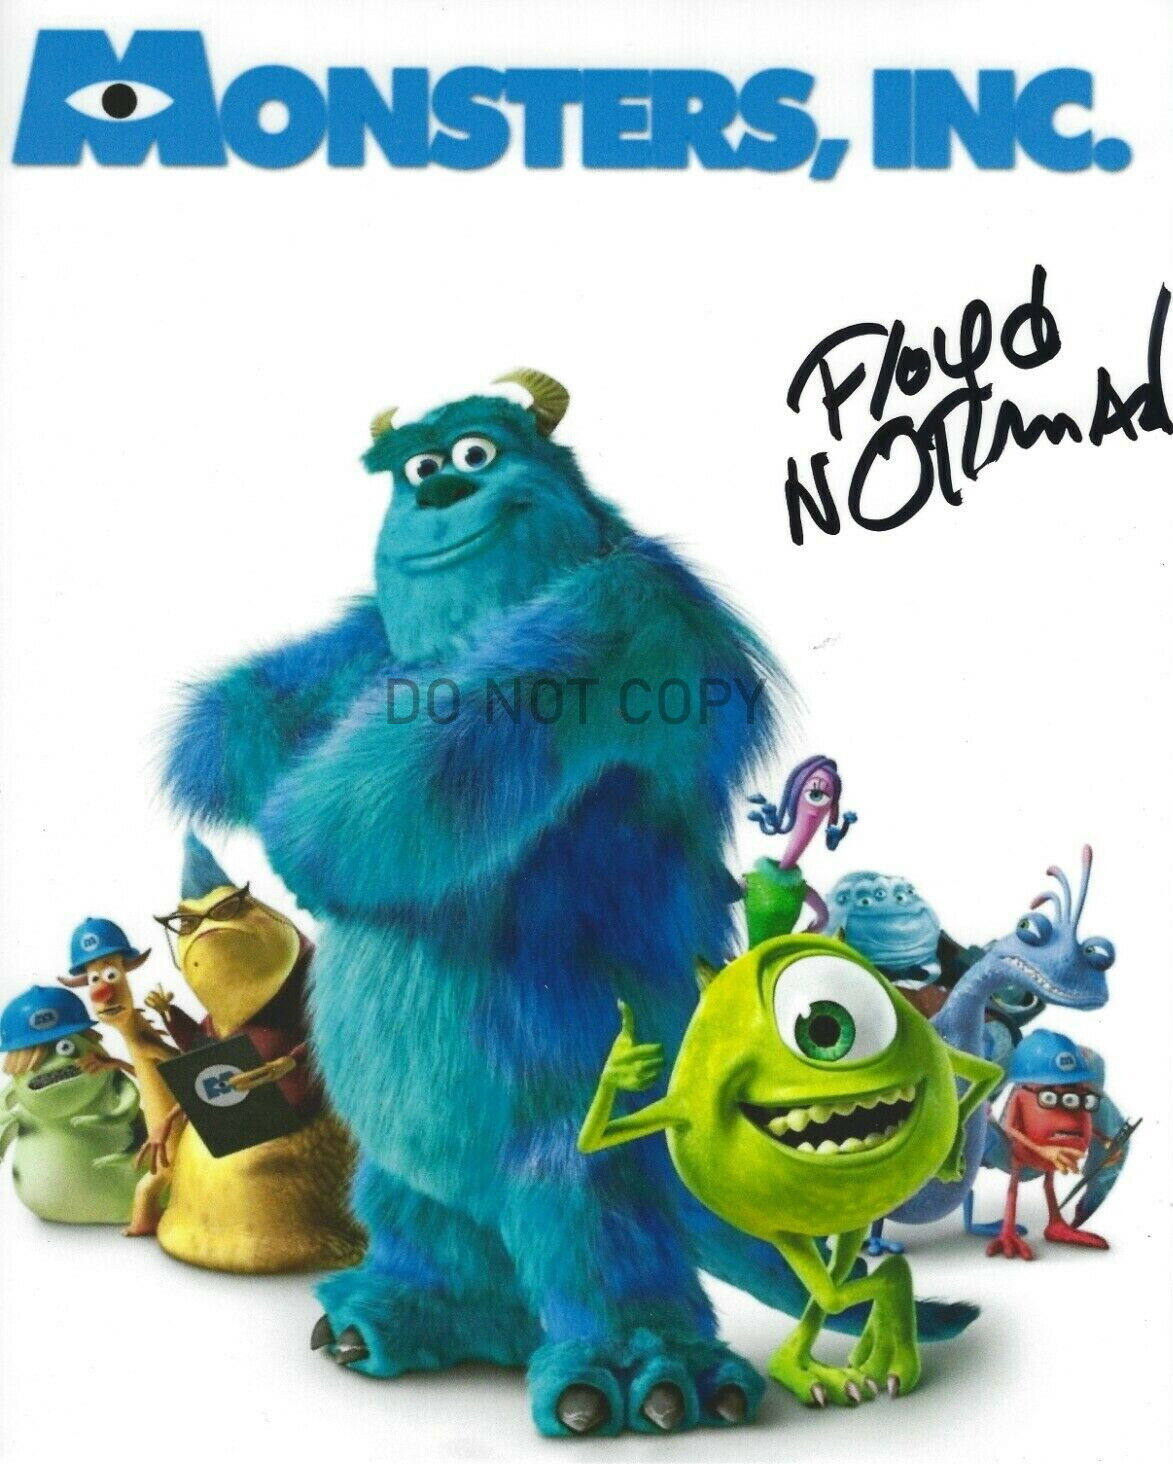 Disney Monsters Inc Floyd Norman Autographed Signed 8x10 Photo Poster painting Animator REPRINT